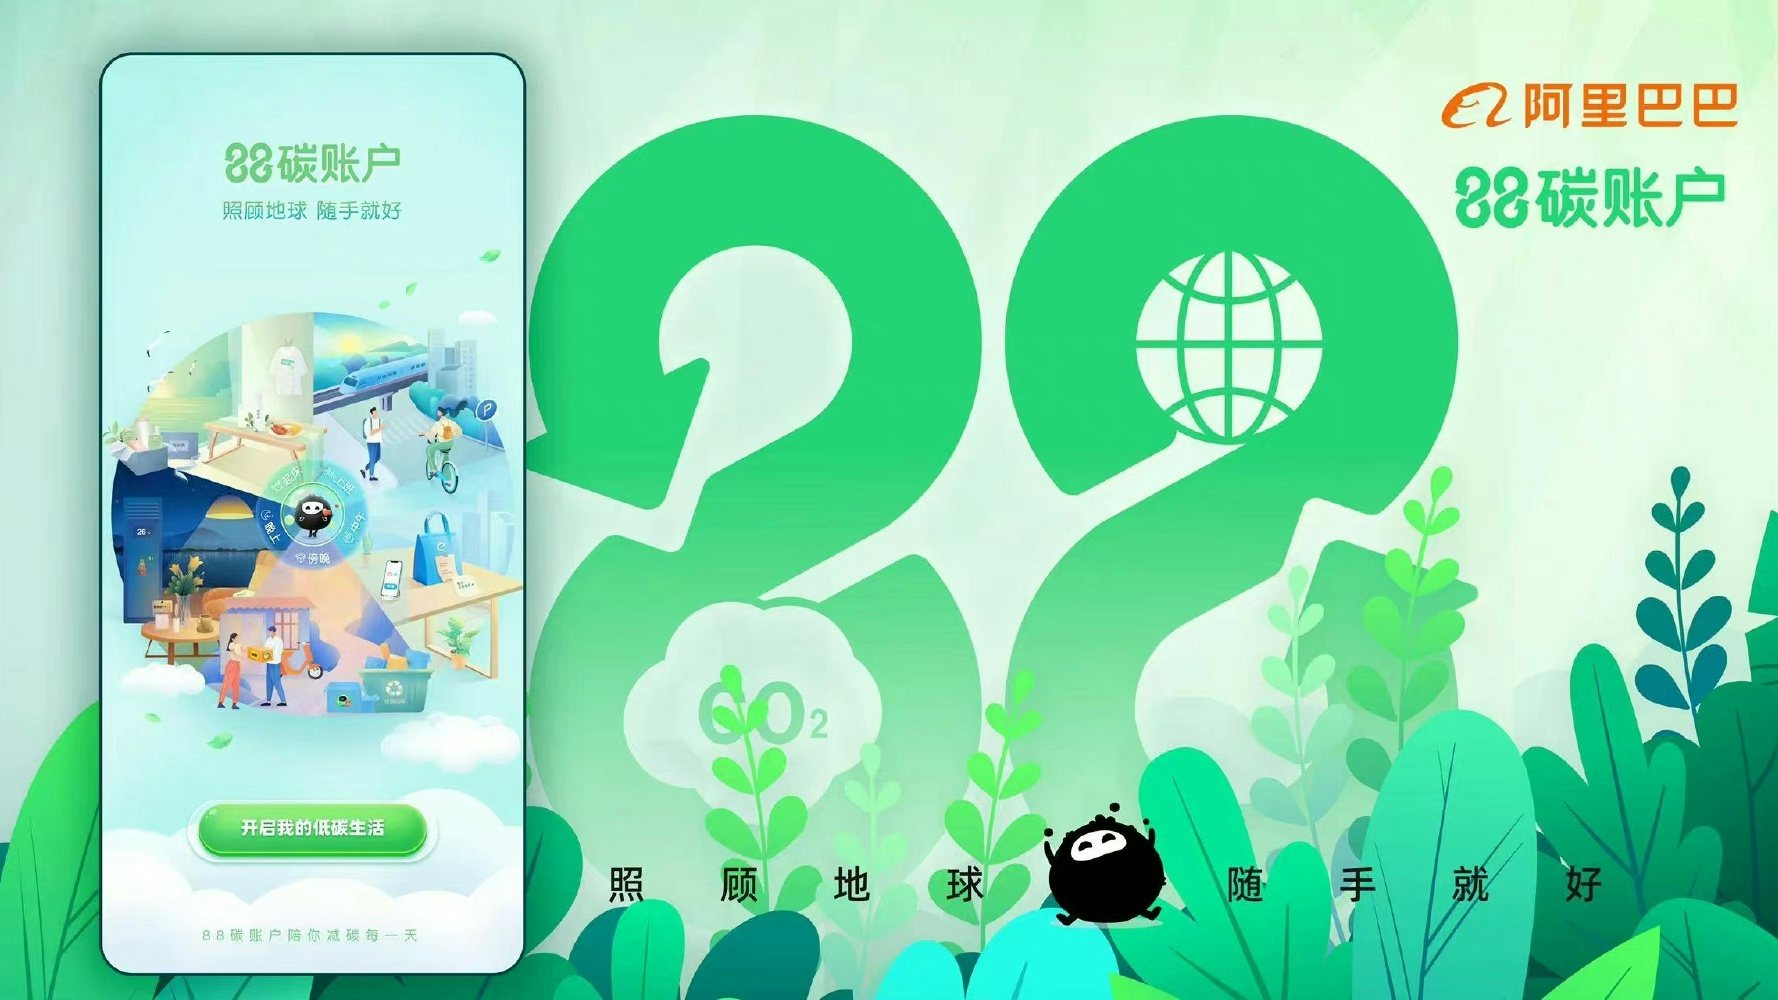 Alibaba released a new rewards system to encourage consumers to reduce their carbon emissions. Will it be as sensational as Ant Forest? Photo: Alibaba